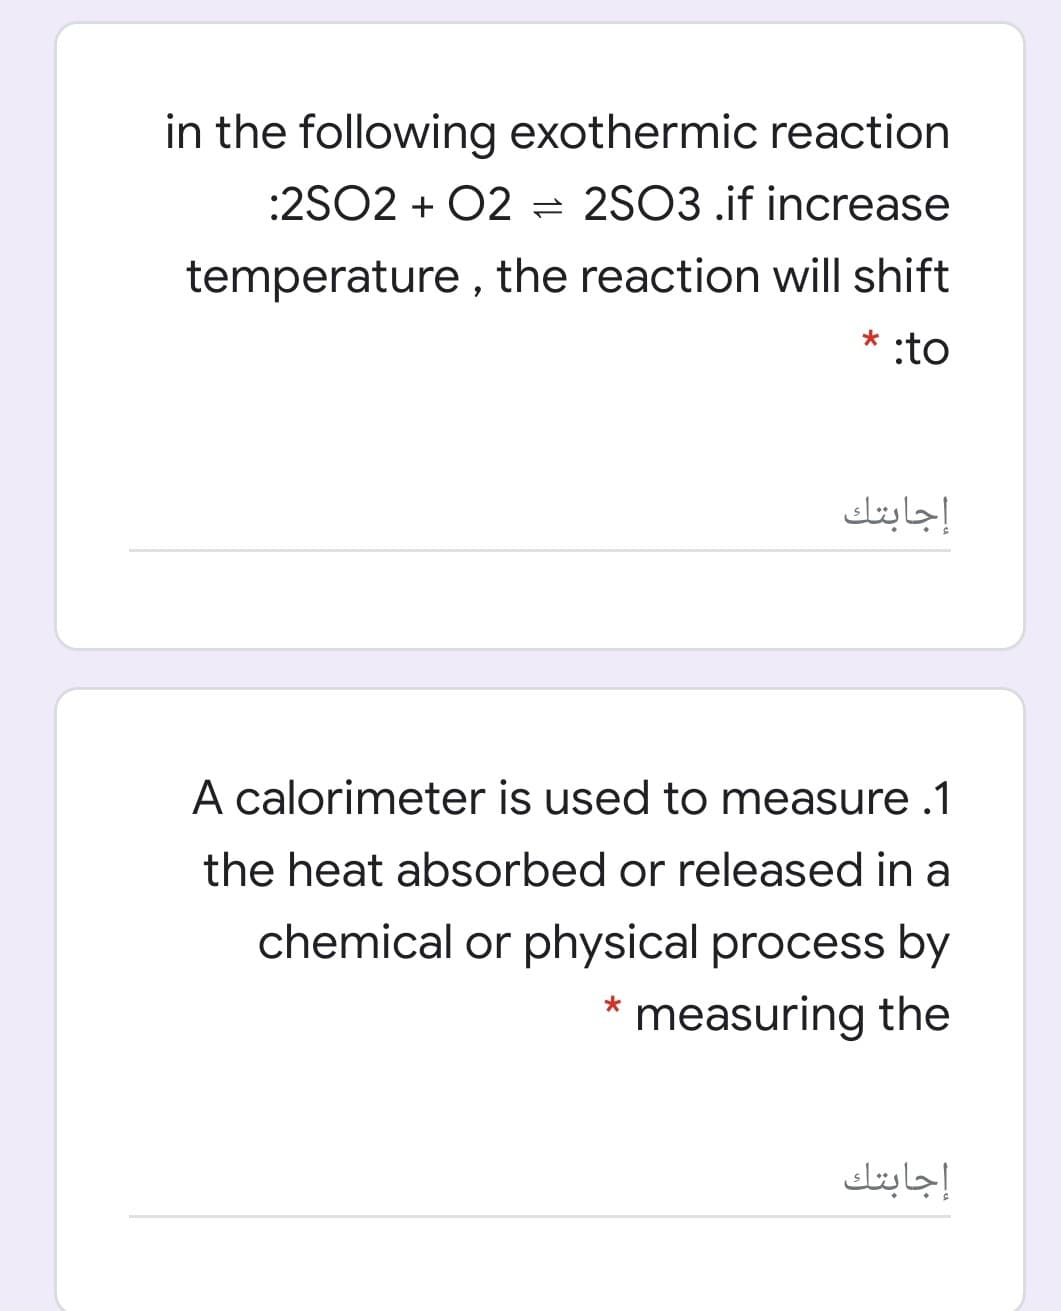 in the following exothermic reaction
:2SO2 + 02 = 2SO3 .if increase
temperature , the reaction will shift
* :to
إجابتك
A calorimeter is used to measure .1
the heat absorbed or released in a
chemical or physical process by
* measuring the
إجابتك
